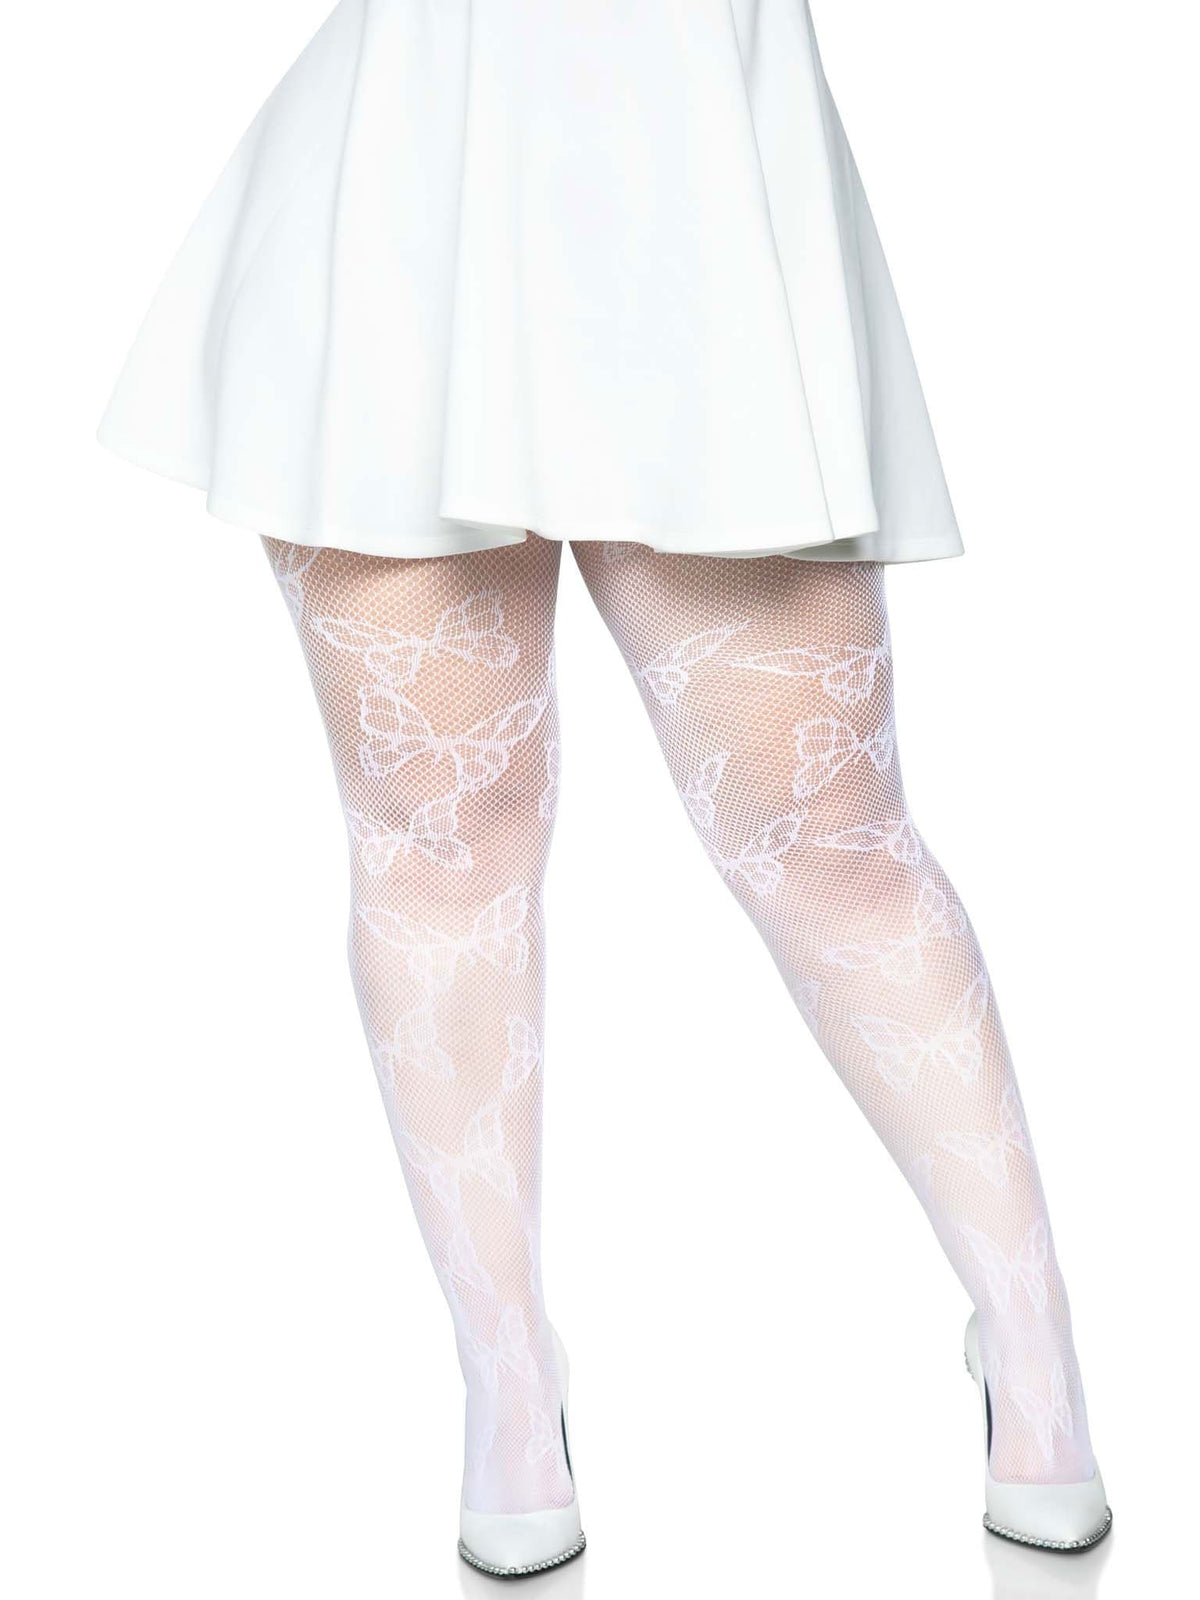 butterfly net tights 1x 2x white